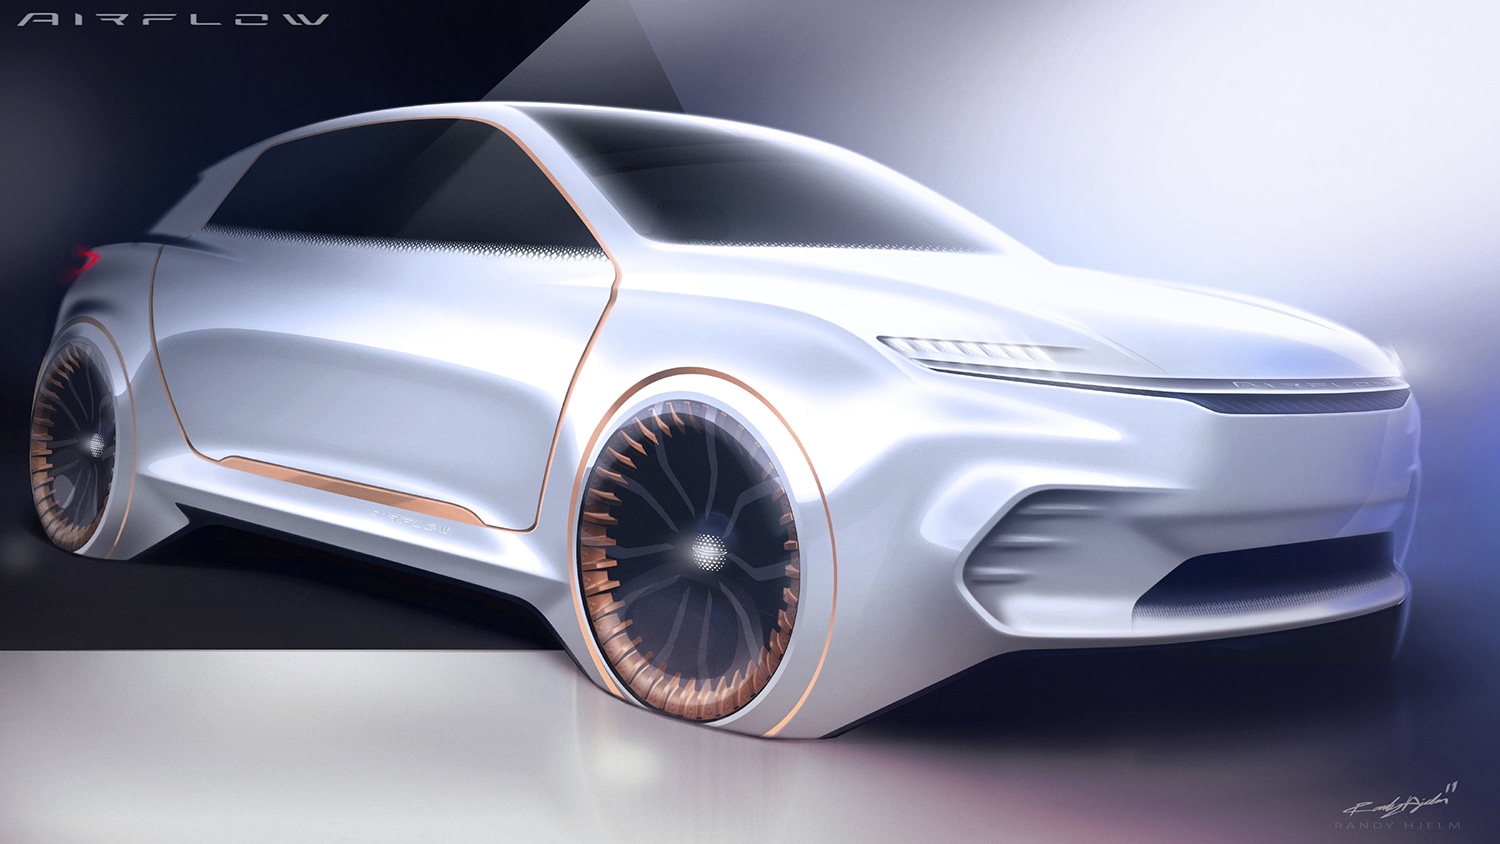 Fiat Chrysler Automobiles will exhibit the Airflow Vision Concept at this year's CES in Las Vegas.